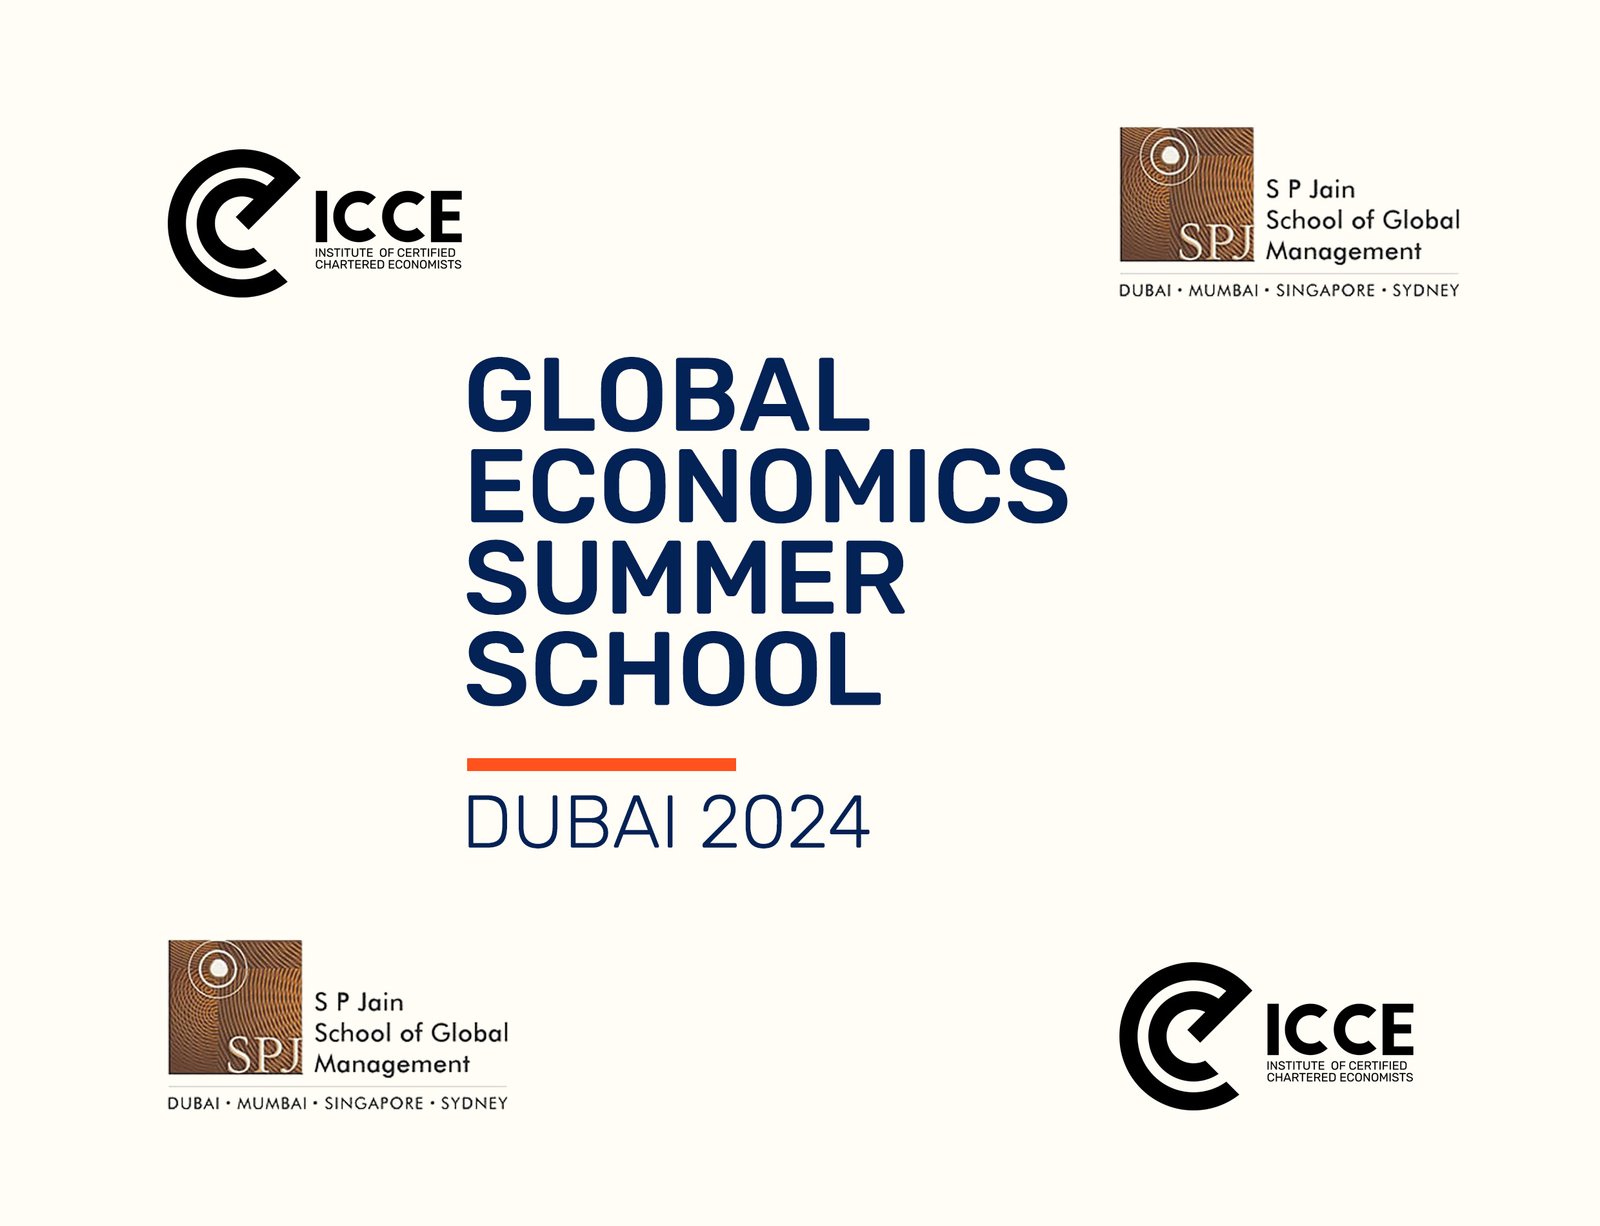 ICCE partners with S.P. Jain to host the 2024 Global Economics Summer